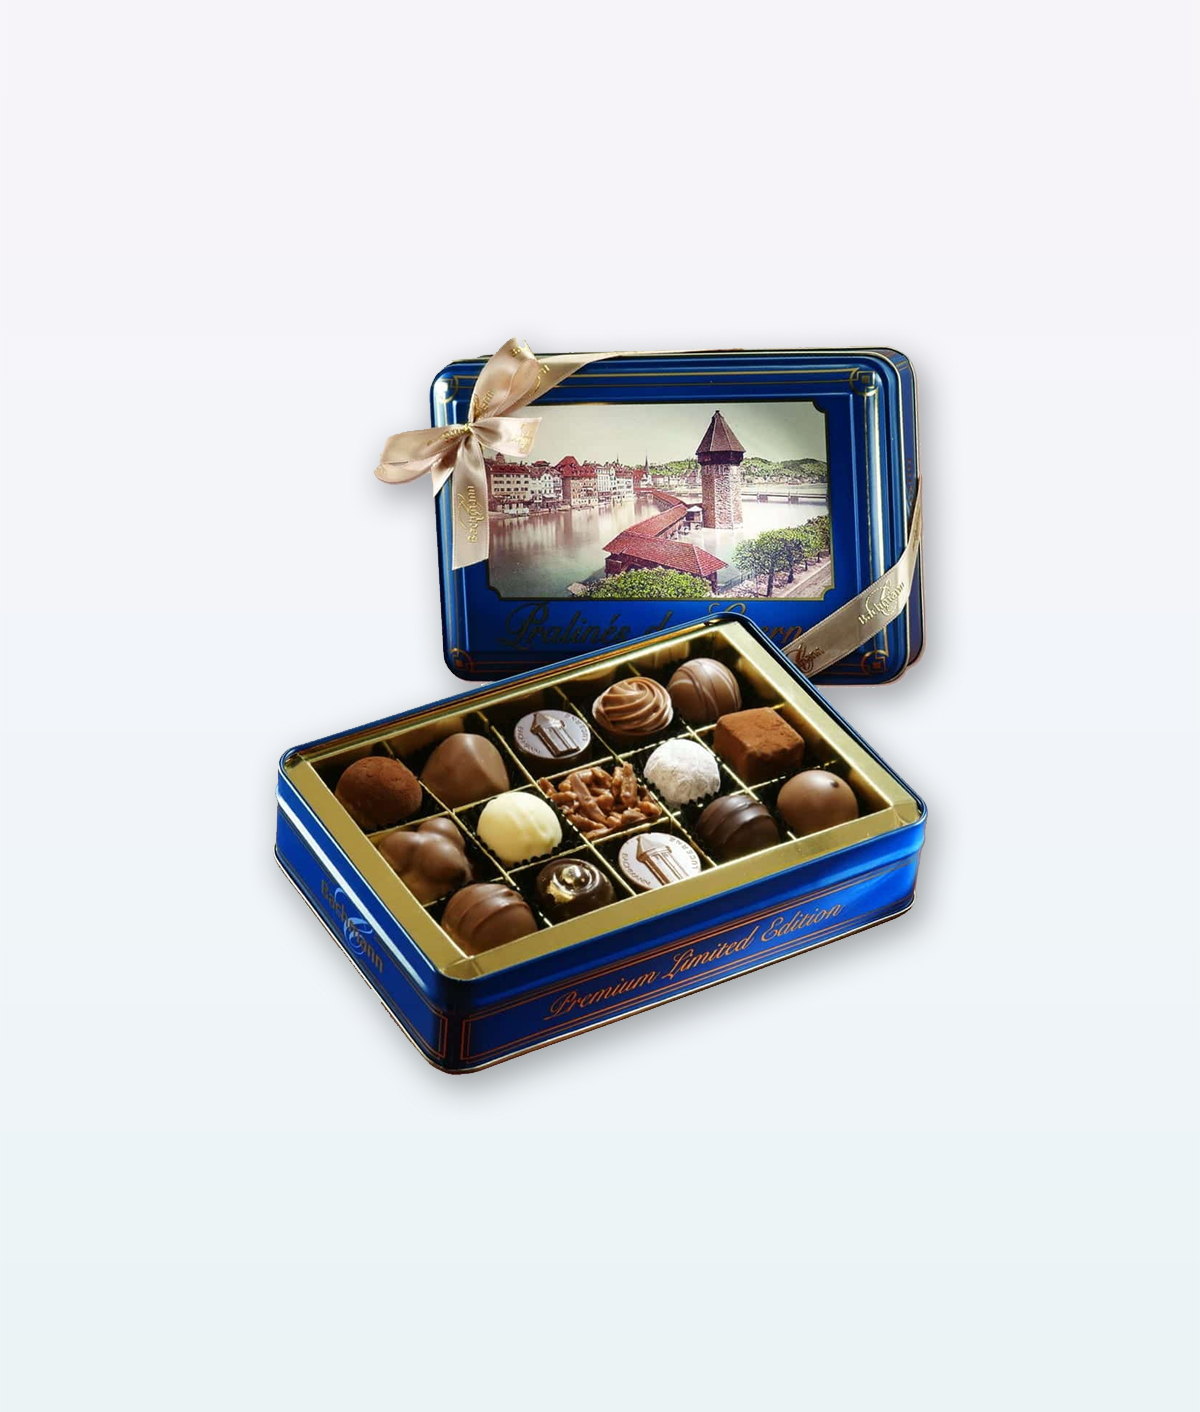 Lindt White Chocolate Order Online- Swissmade Direct